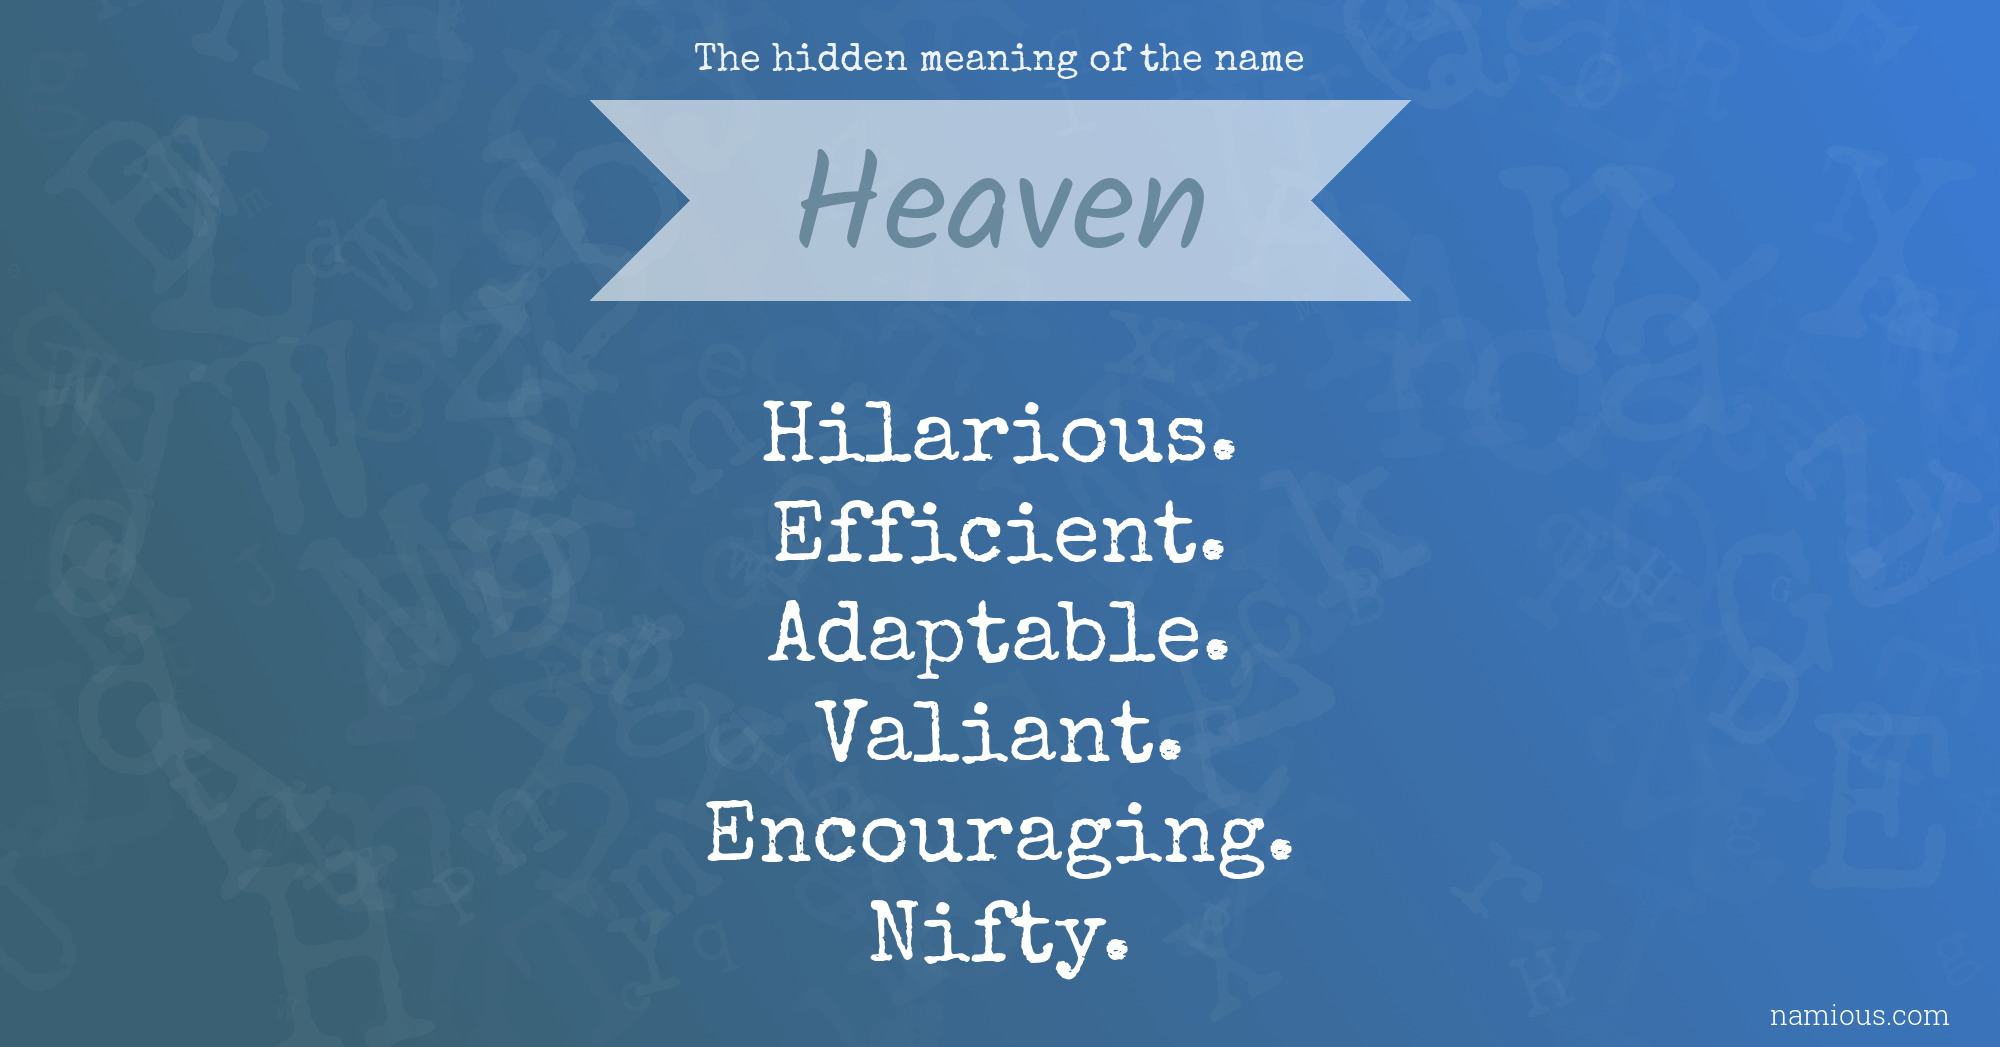 The hidden meaning of the name Heaven